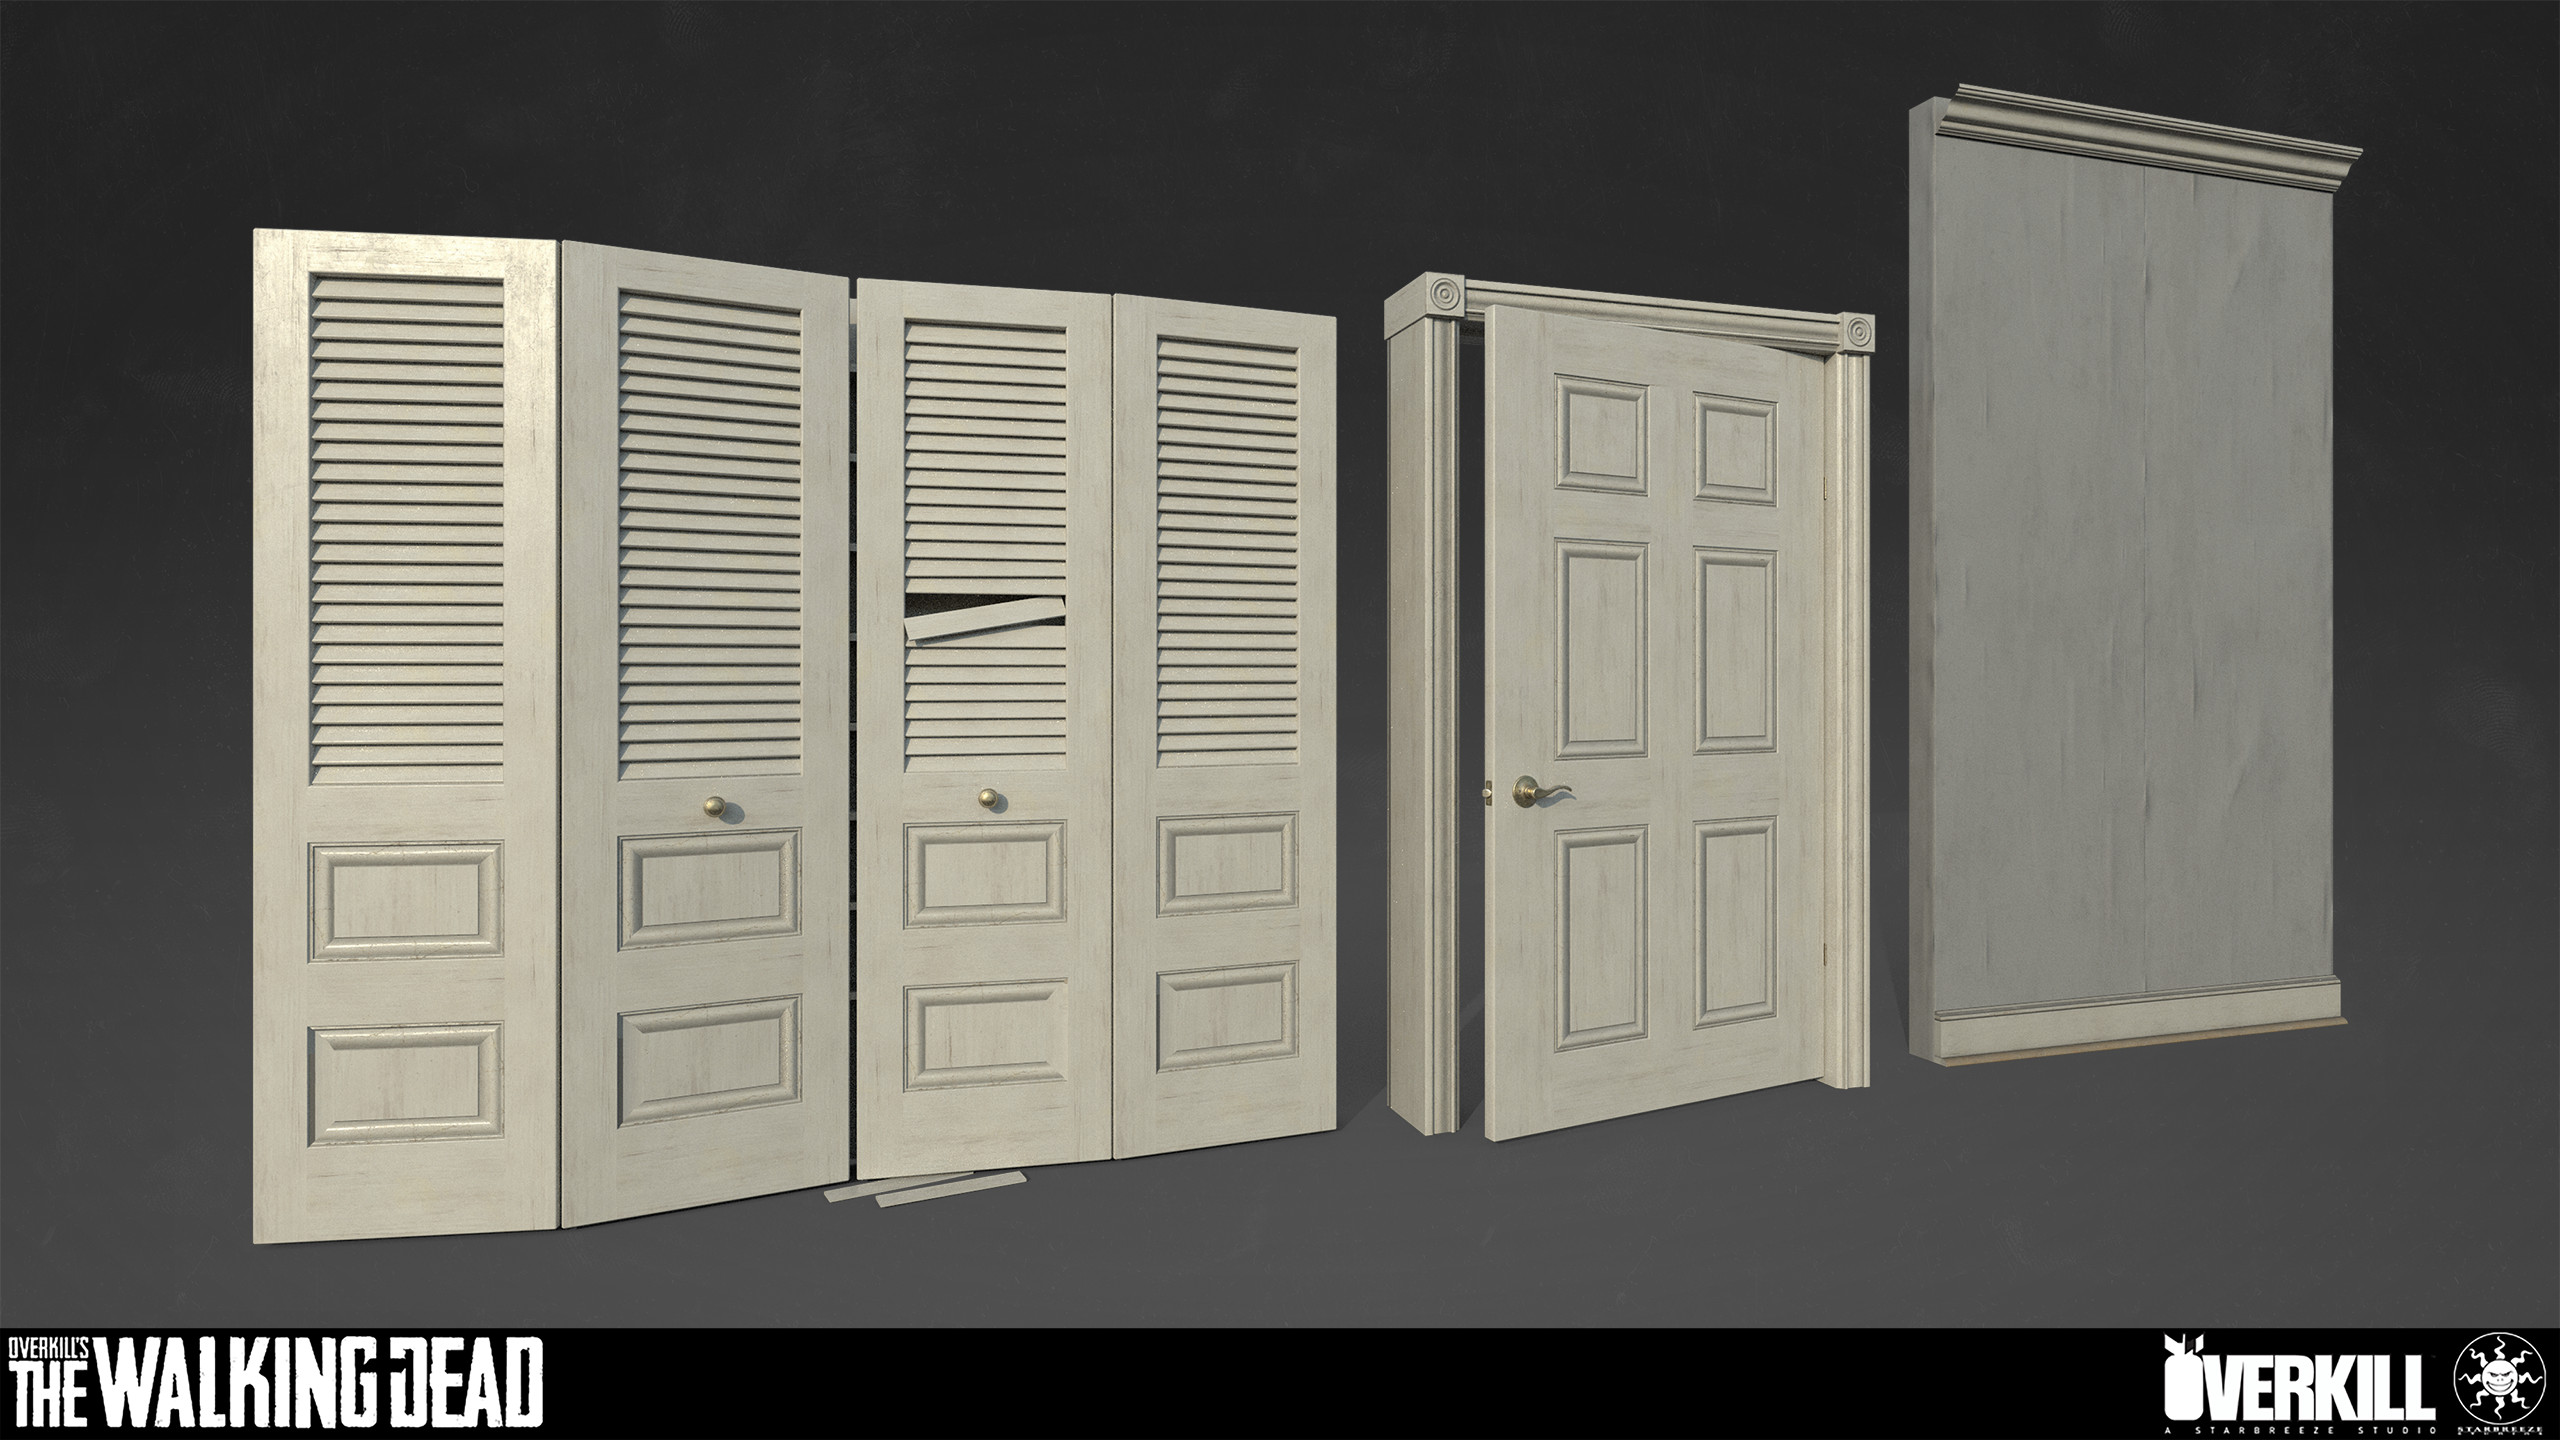 Some of the trims/doorframes/doors from a set that is used throughout the residential interiors